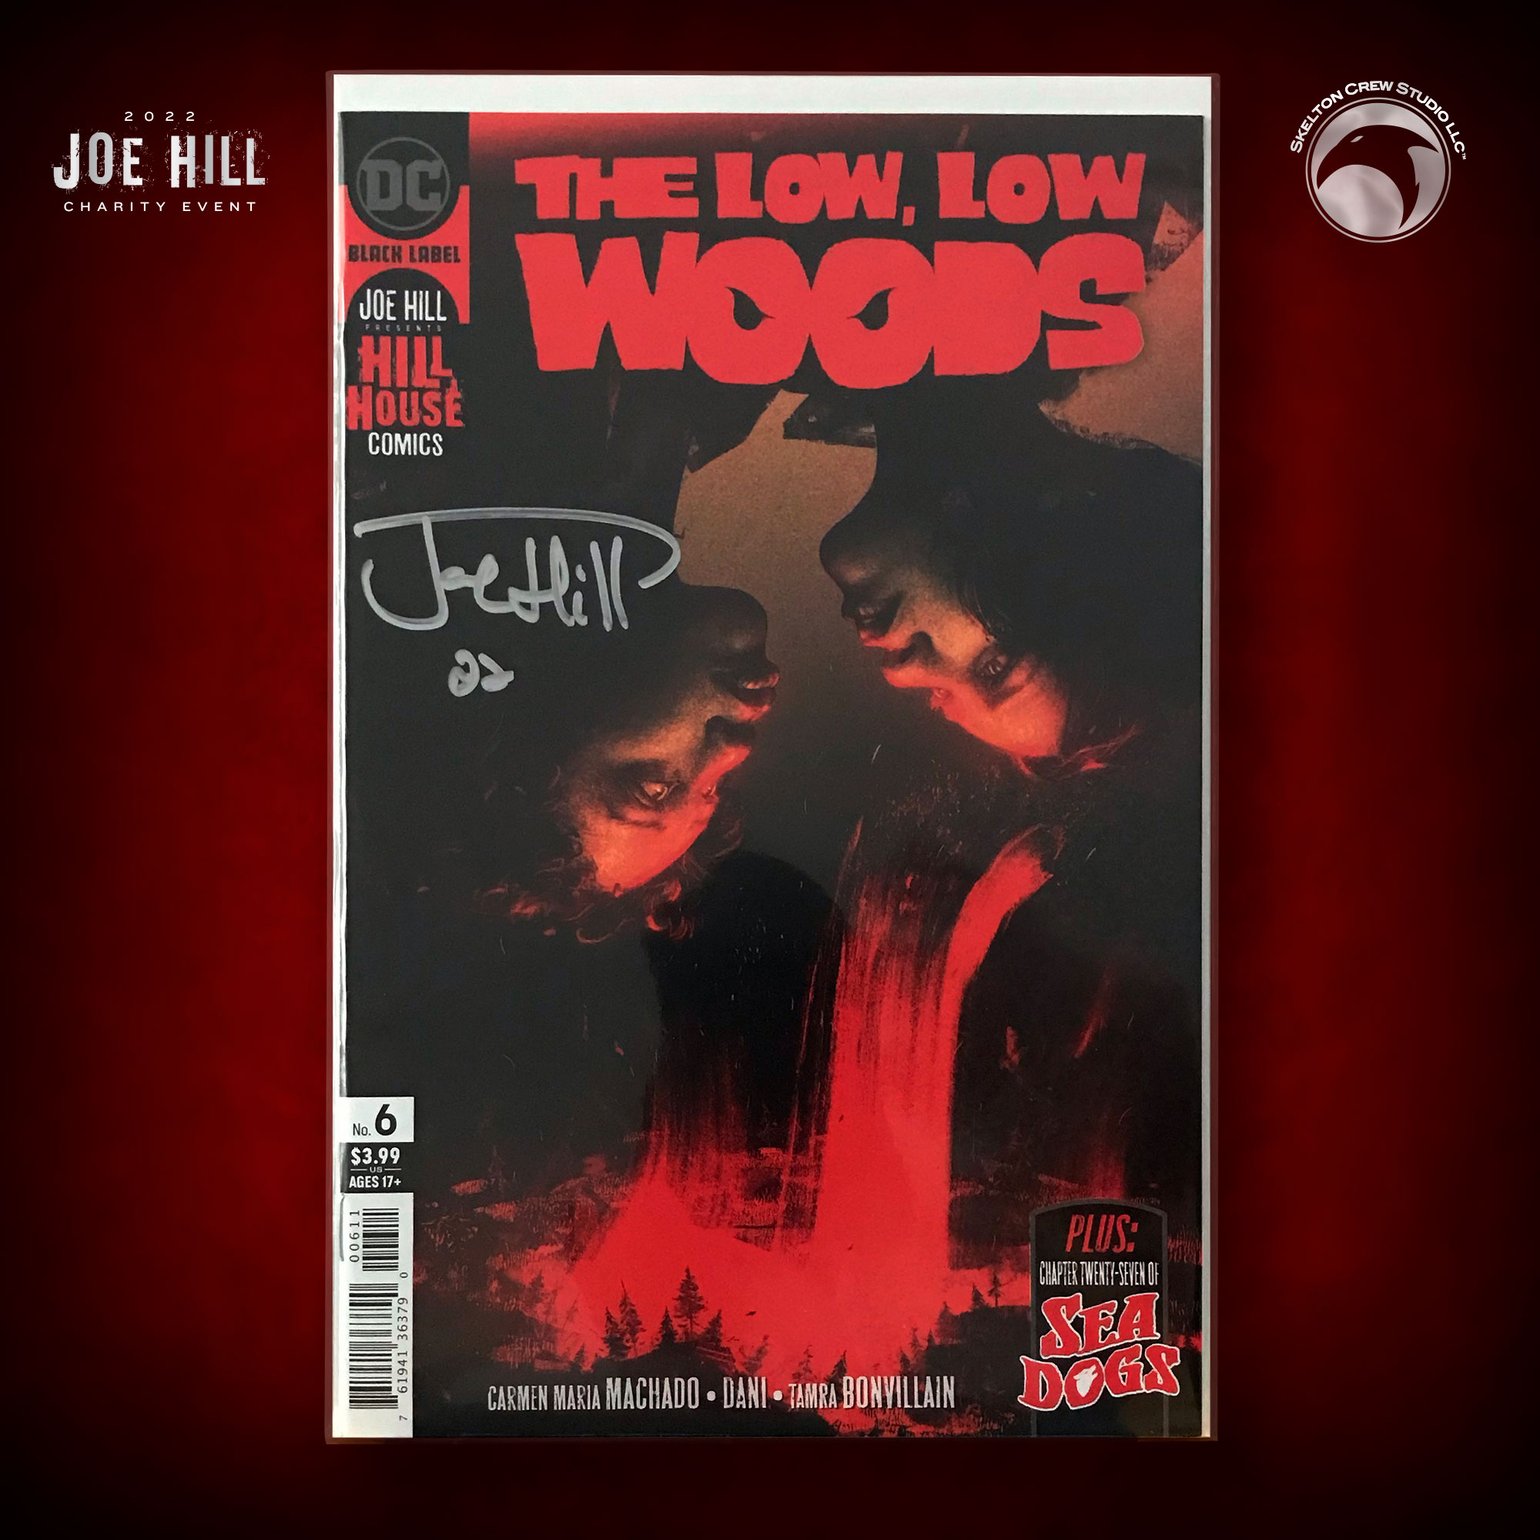 Image of JOE HILL 2022 CHARITY EVENT 45: SIGNED "The Low Low Woods" #6